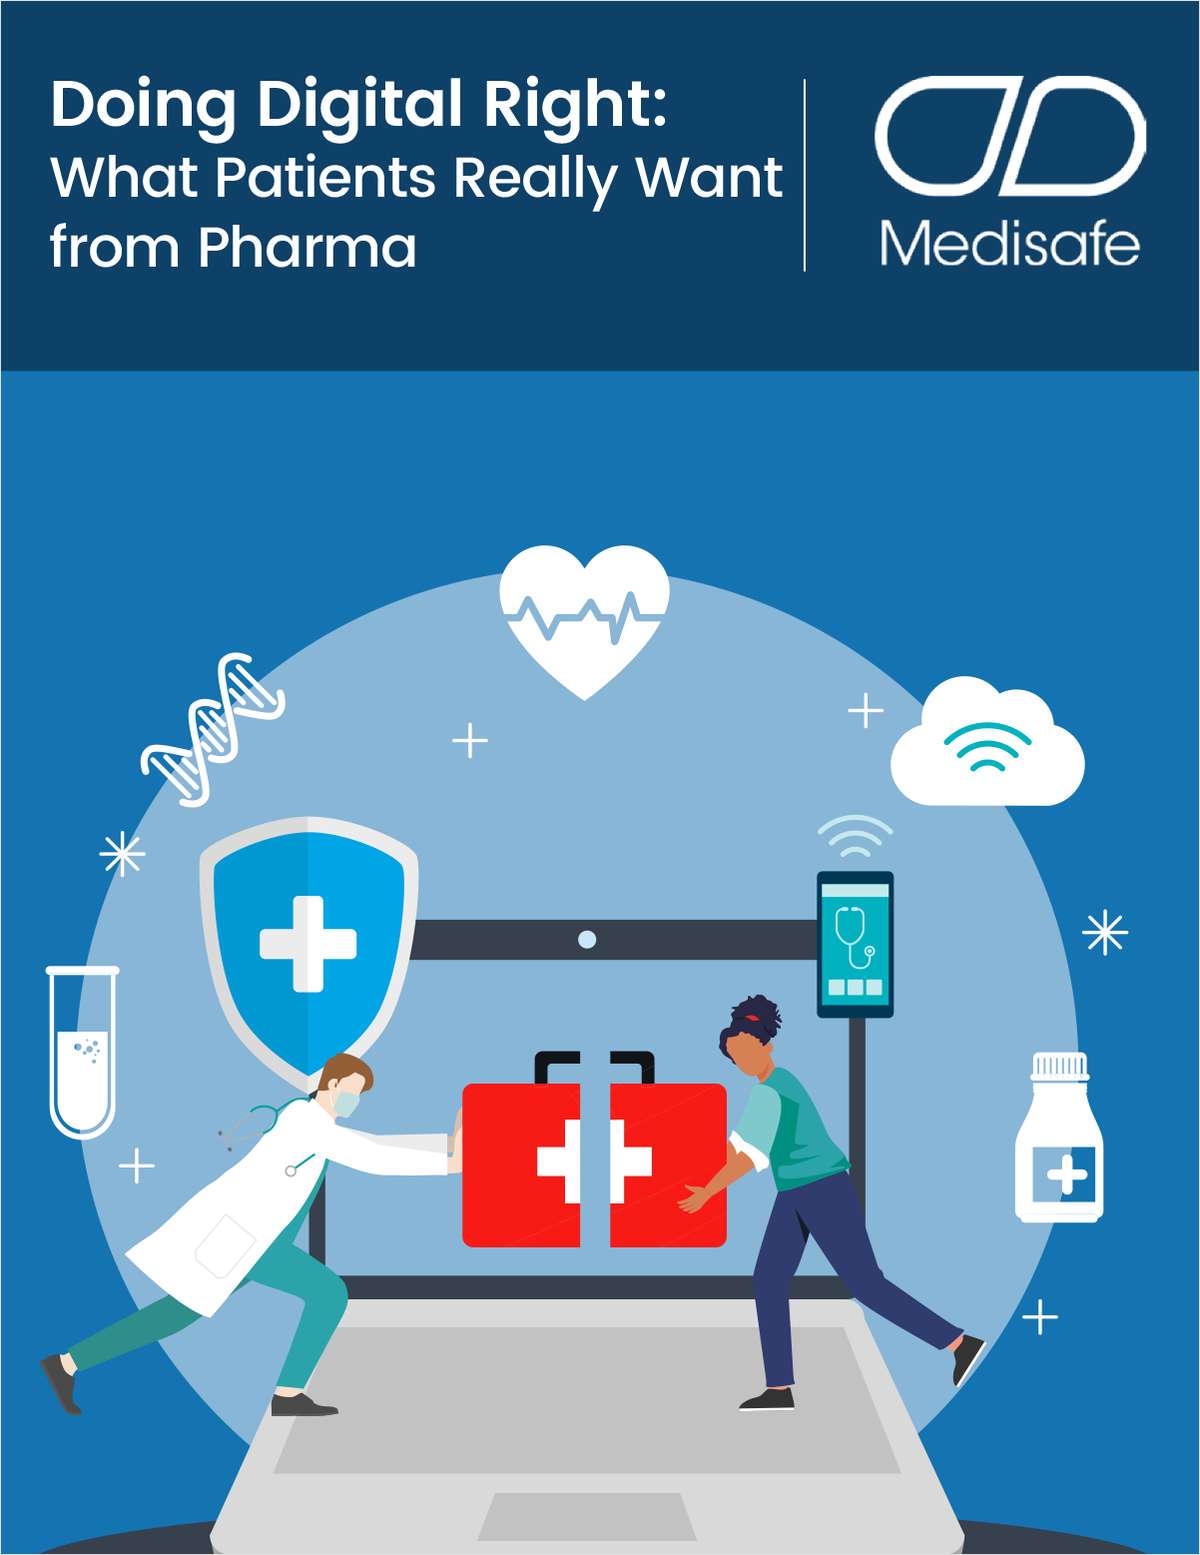 Doing Digital Right: What Patients Really Want from Pharma